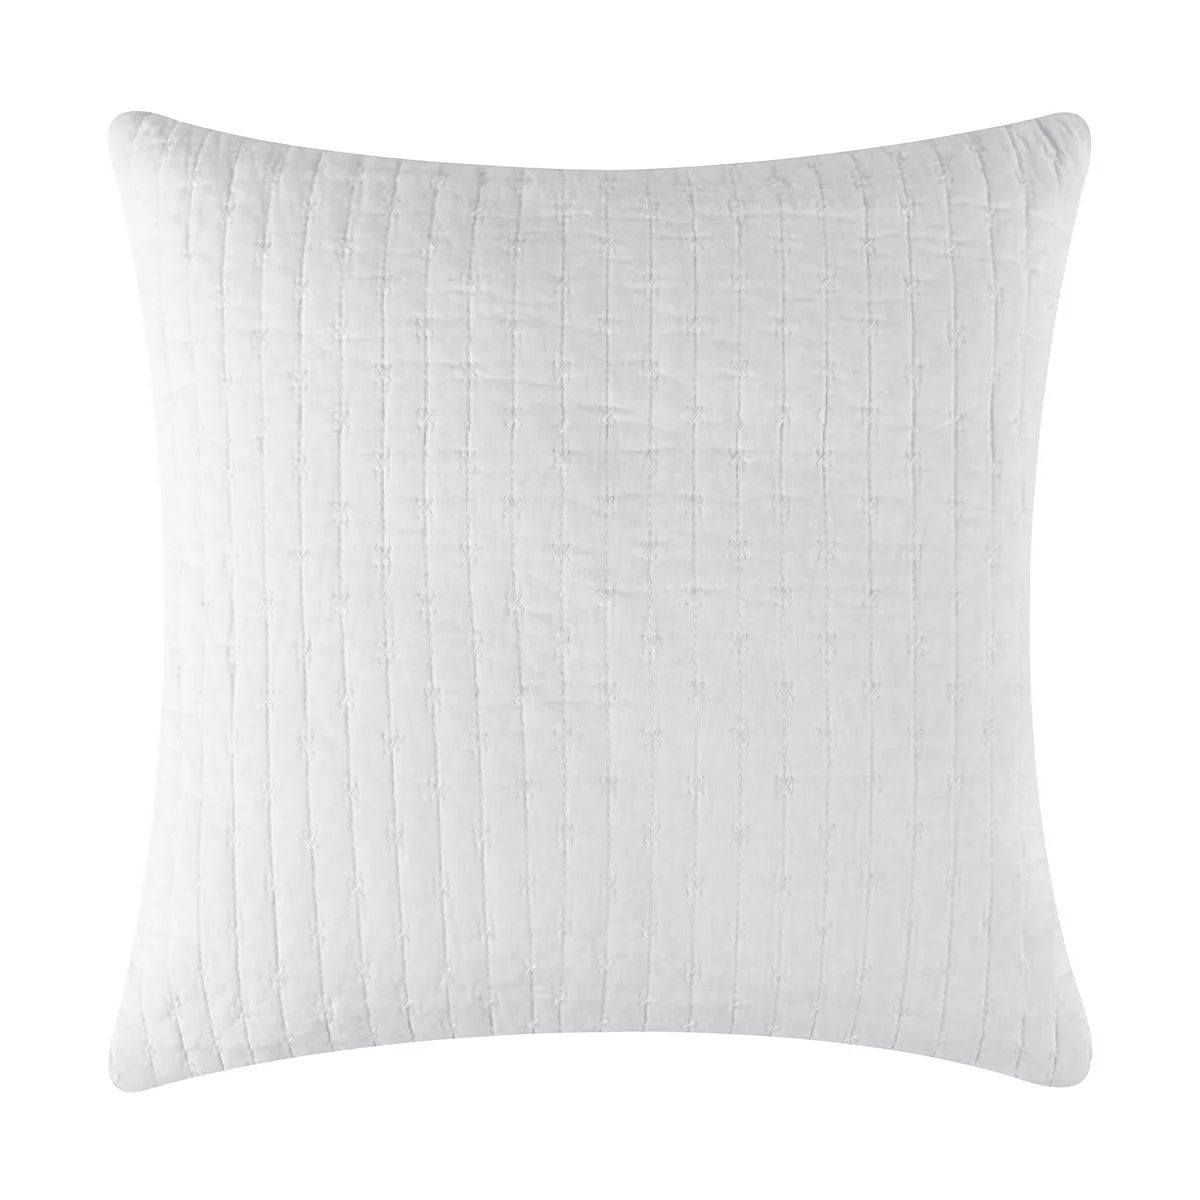 Levtex Home Cross Stitch Square Throw Pillow | Kohl's